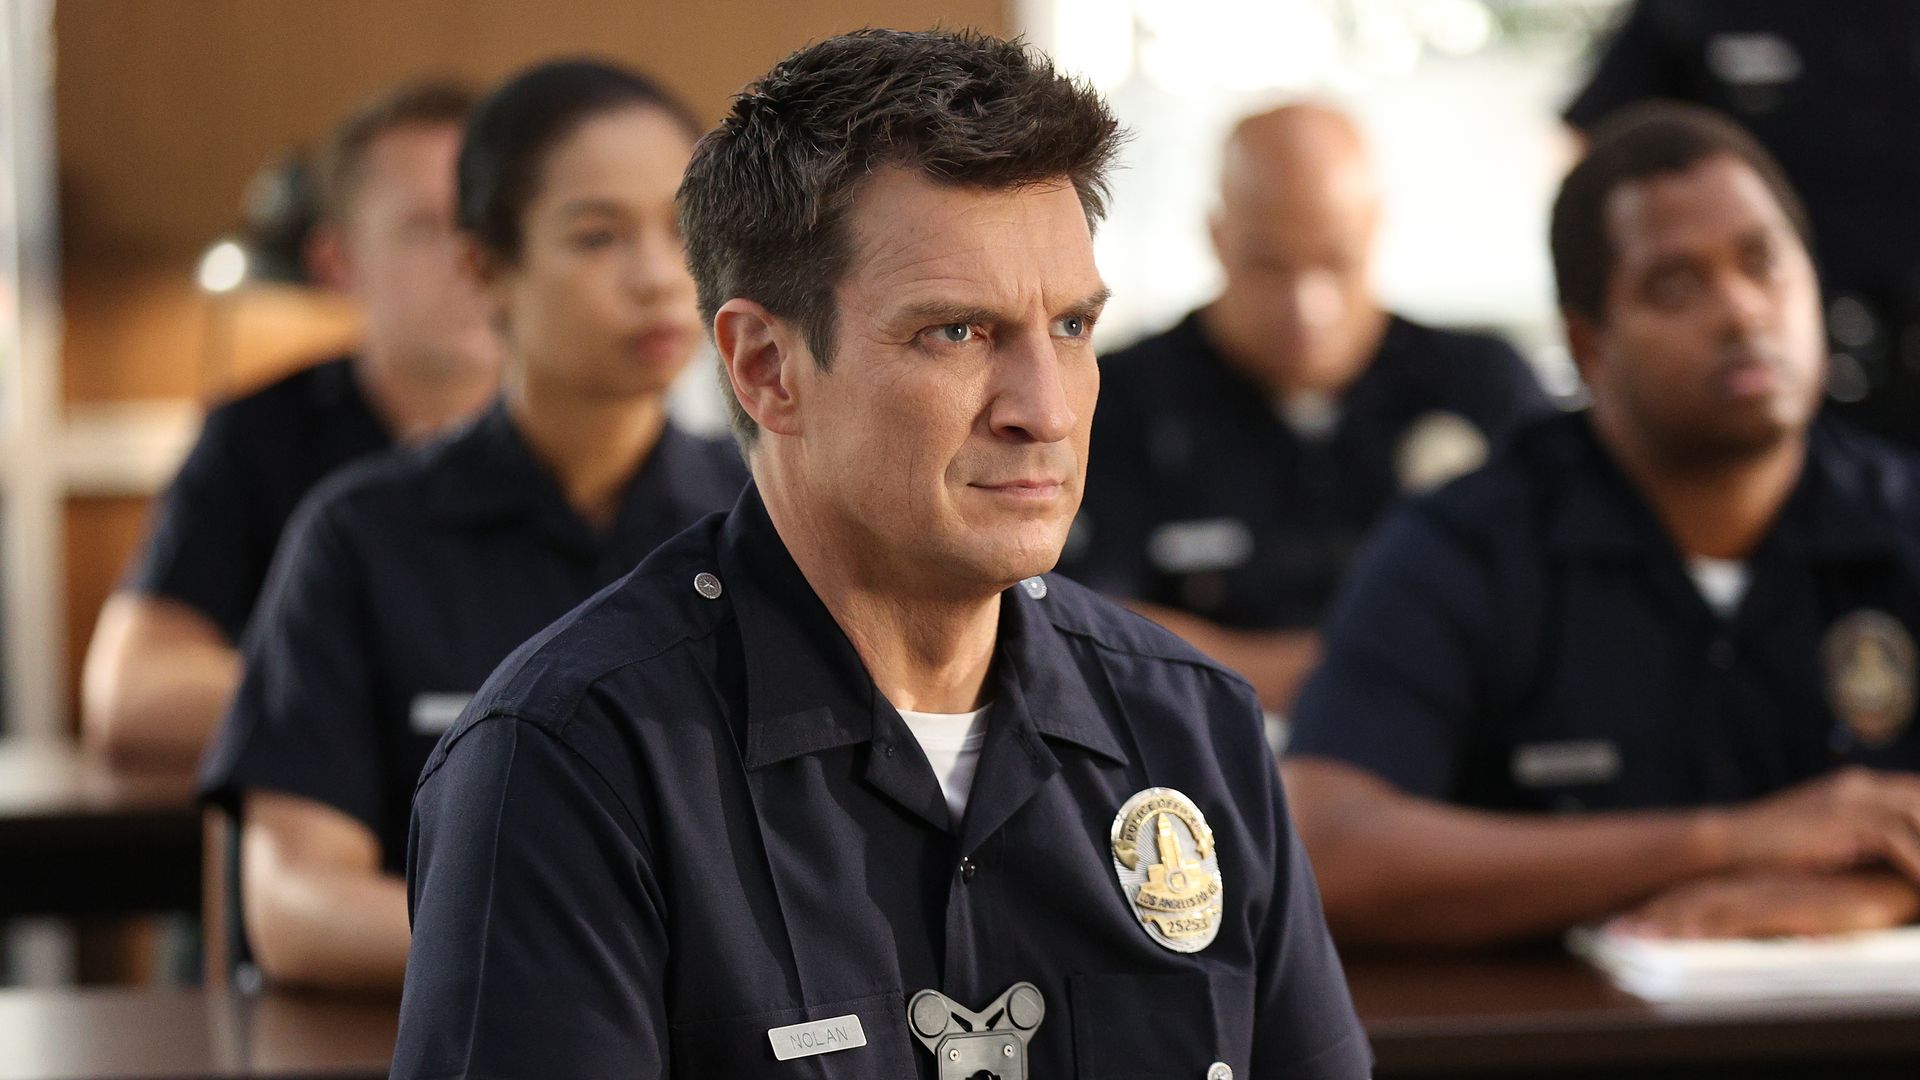 Nathan Fillion in The Rookie close up